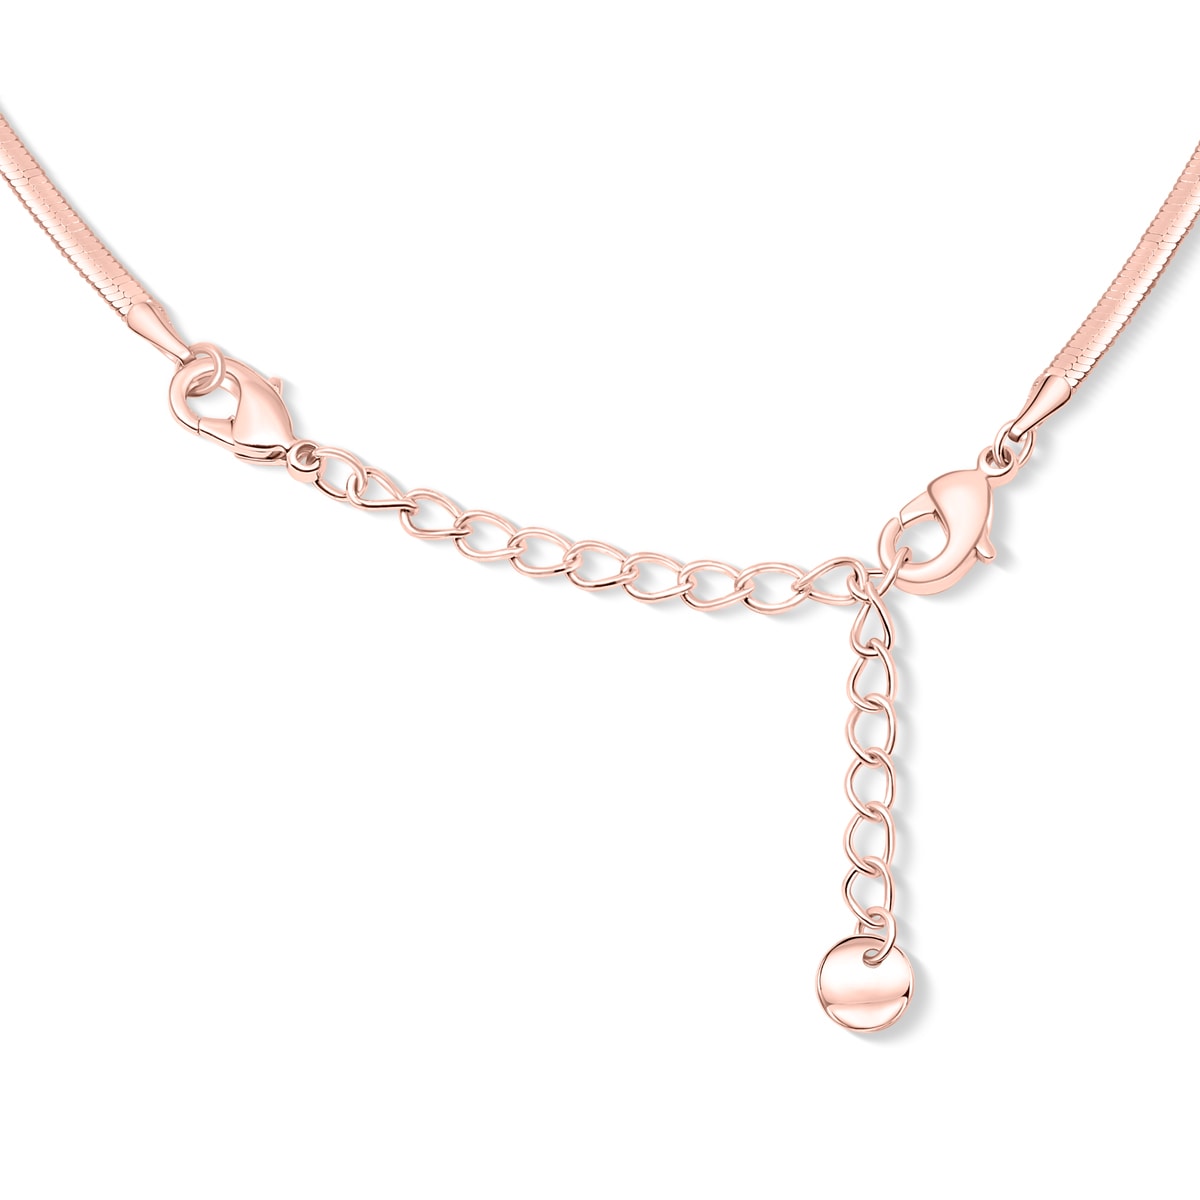 Rose gold affordable solid chain necklace